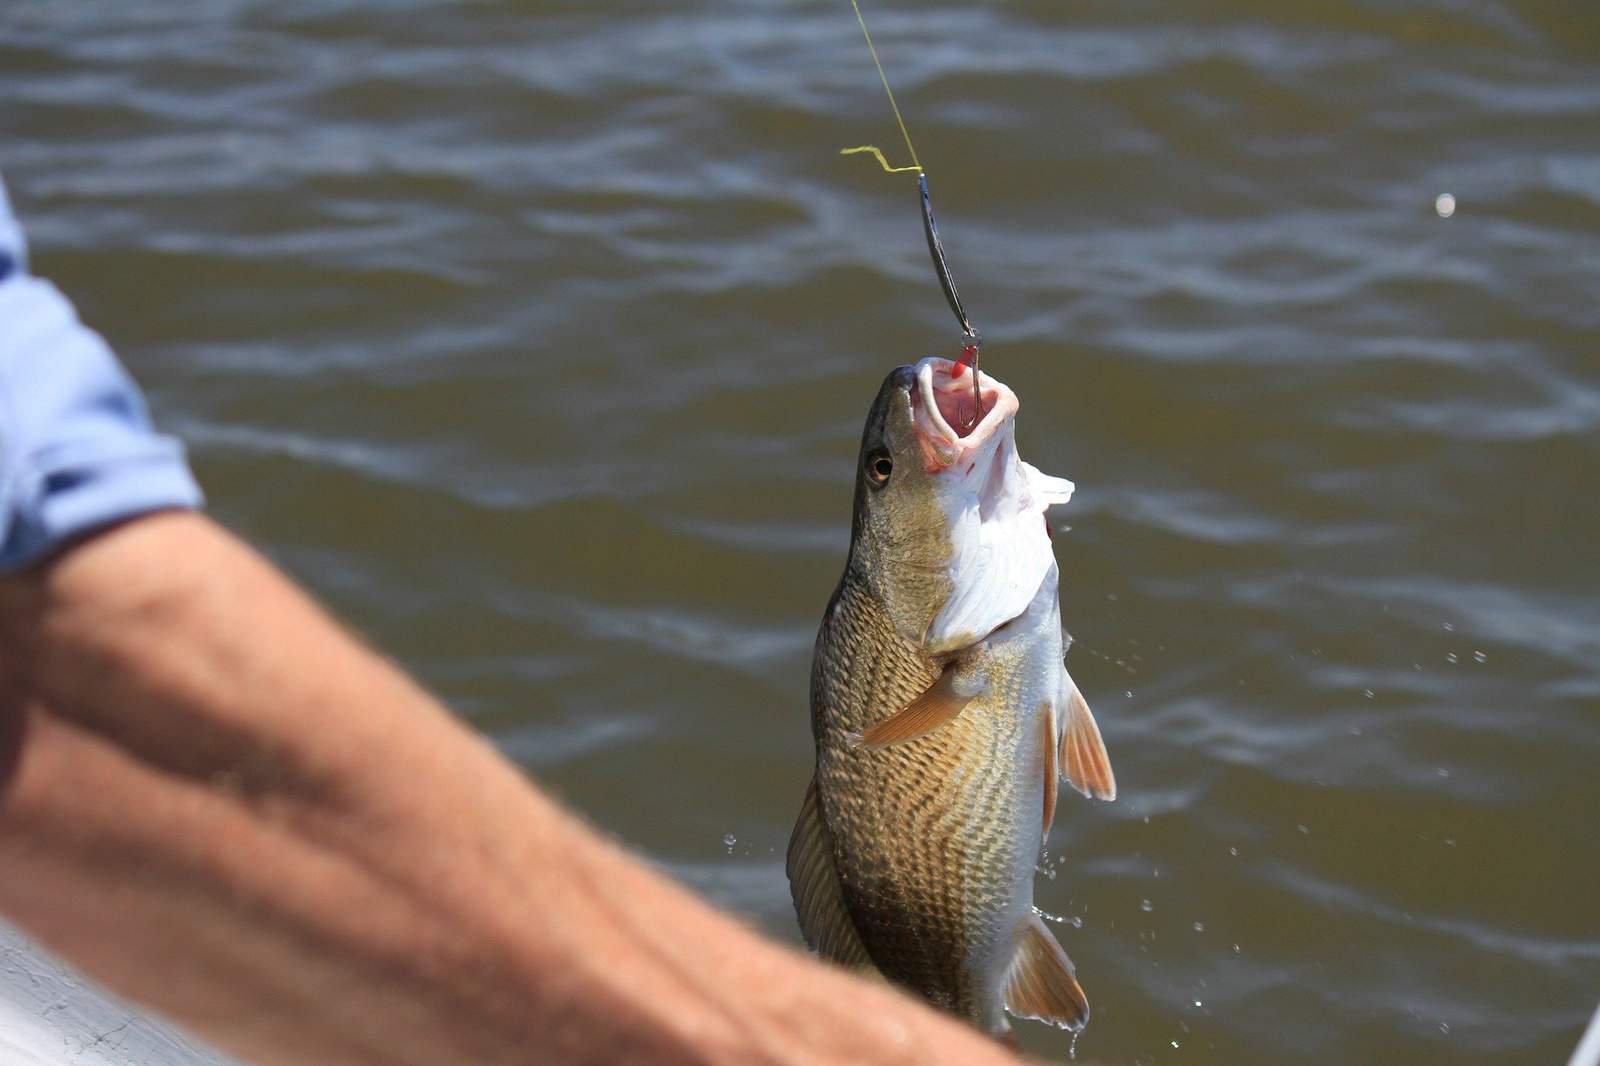 Have some ‘reel fun’ close to home at these San Antonio fishing spots